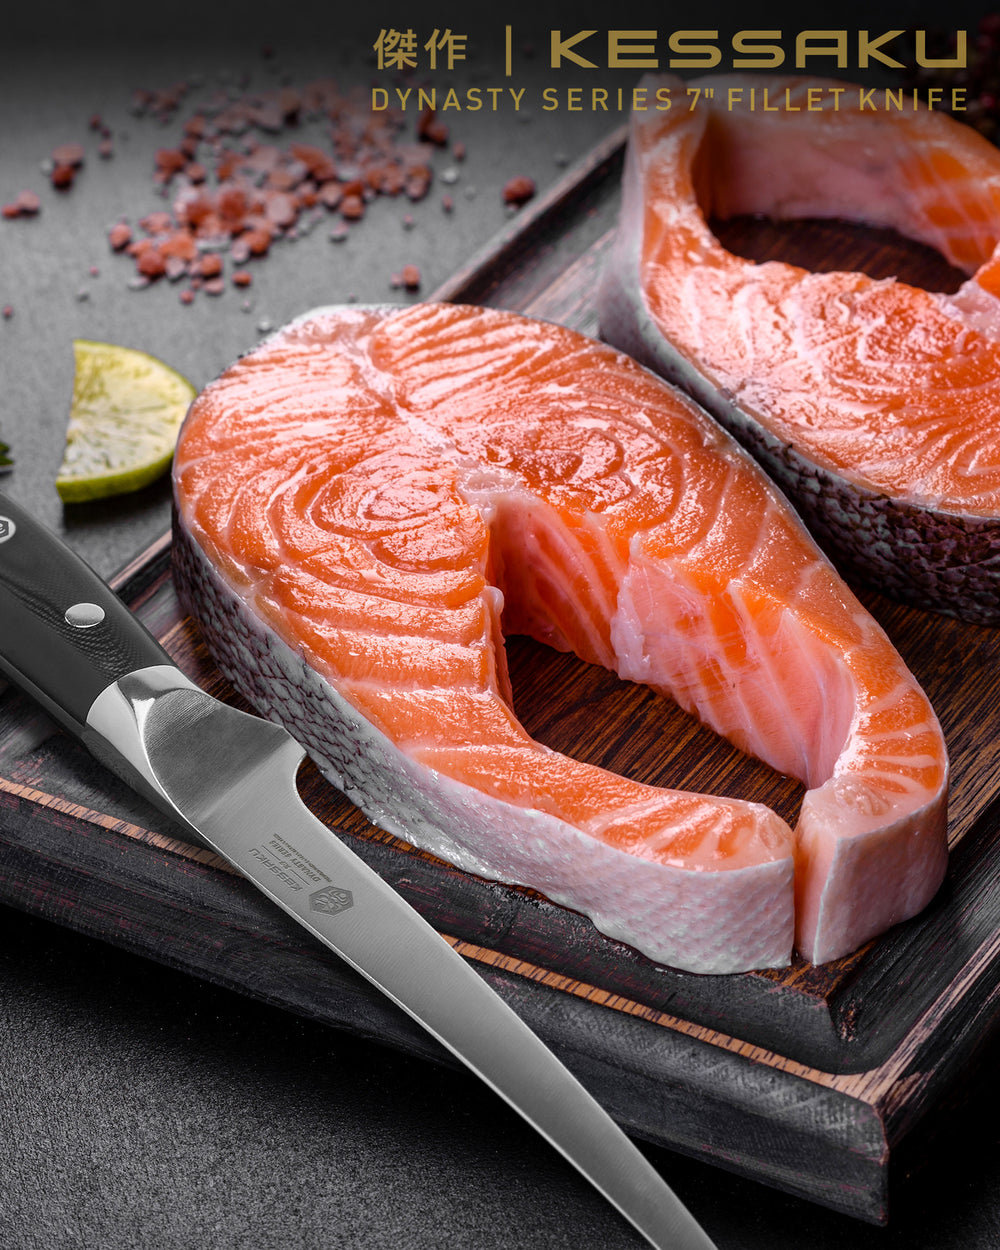 Perfectly trimmed salmon steaks, a slice of lemon, and the Dynasty Fillet Knife